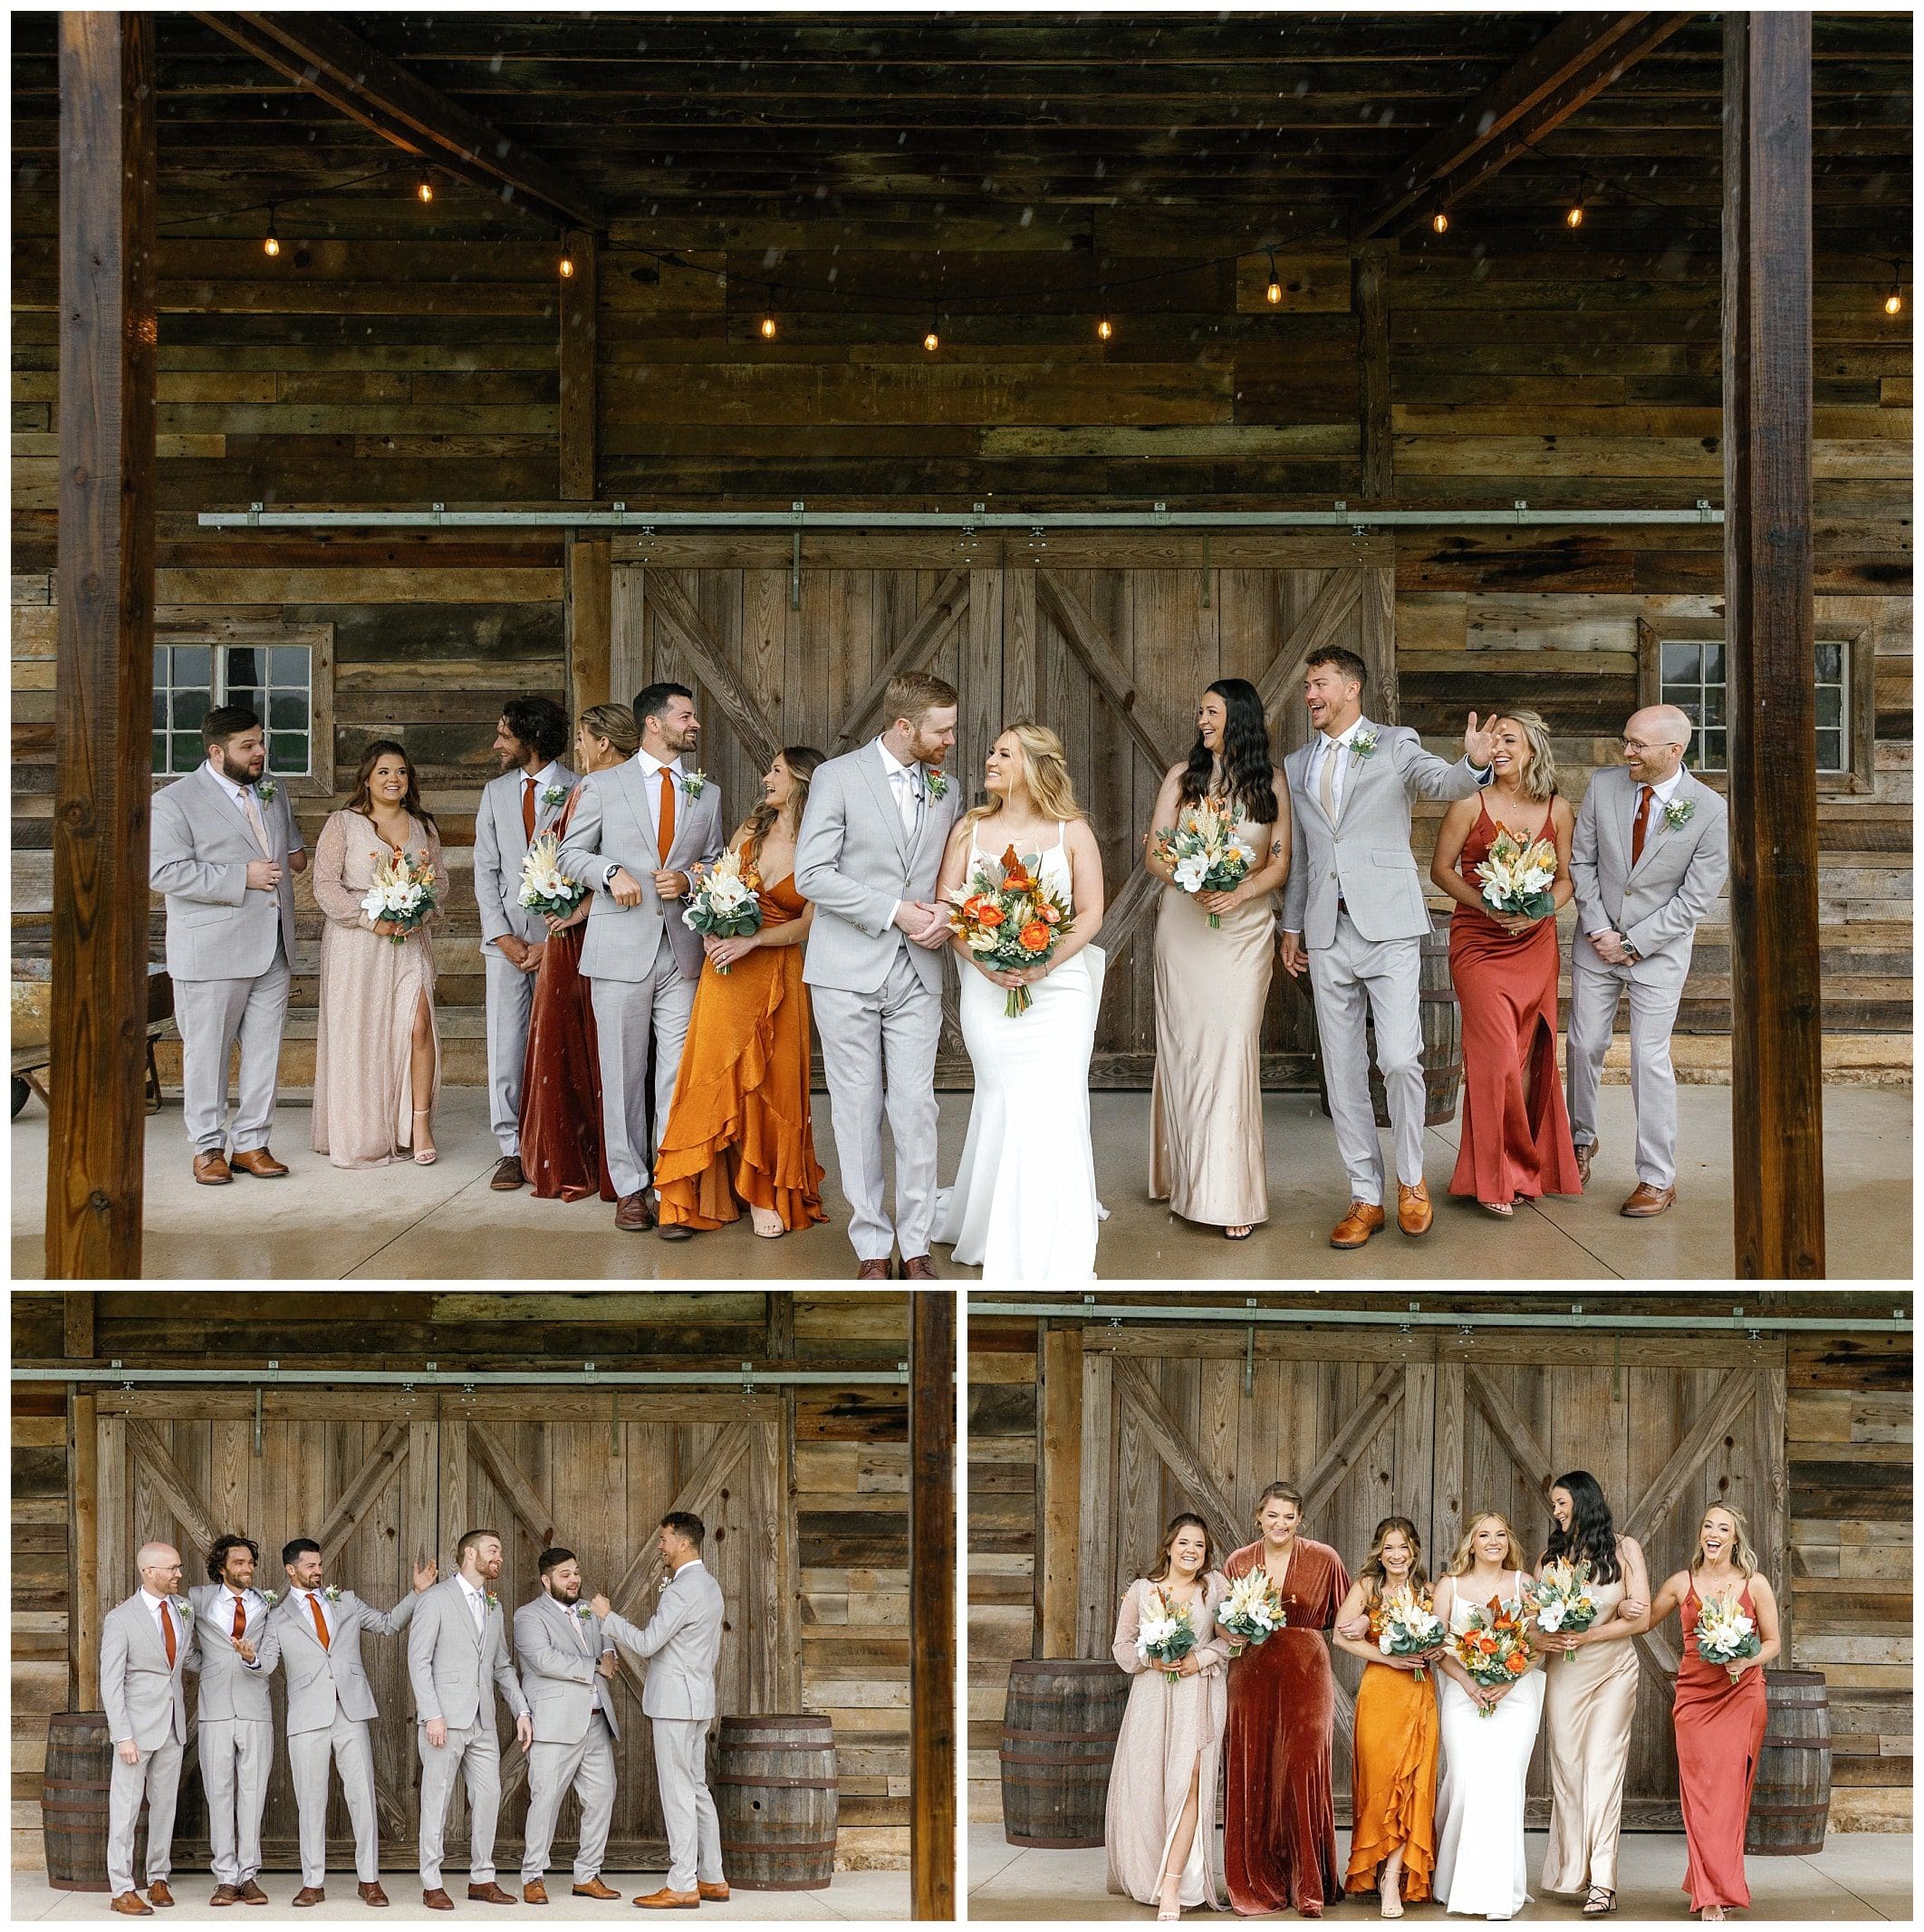 wedding party photos outside farm haven wedding venue on porch bridesmaids shades of taupe and orange 